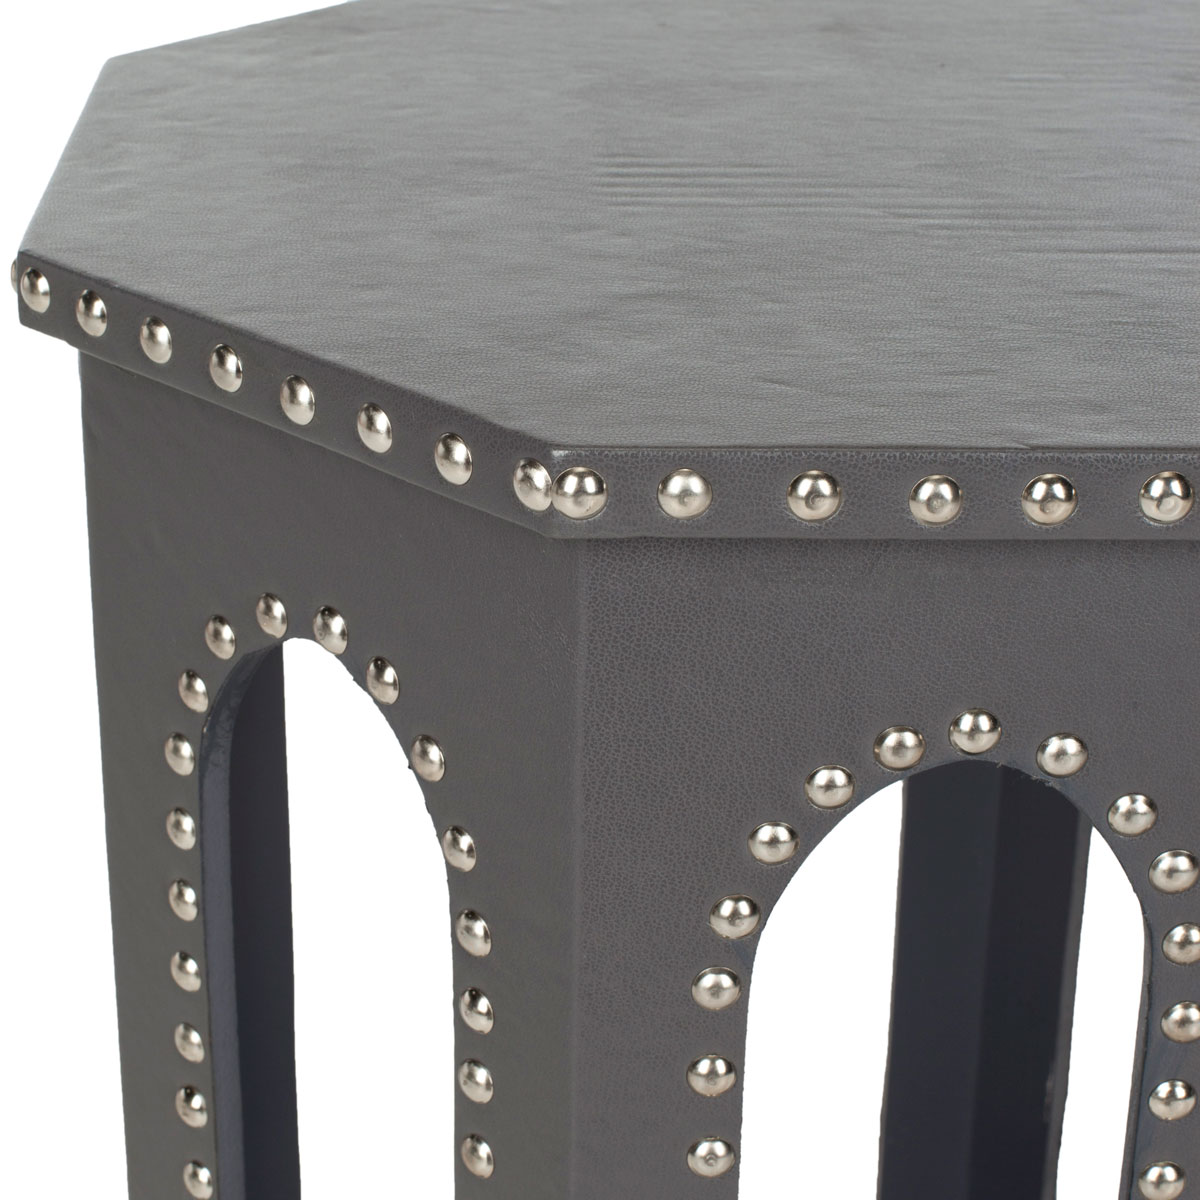 accent tables furniture safavieh detail table with nailheads nara end grey silver nail heads design dining room clearance dark blue side target makeup vanity bedroom decoration